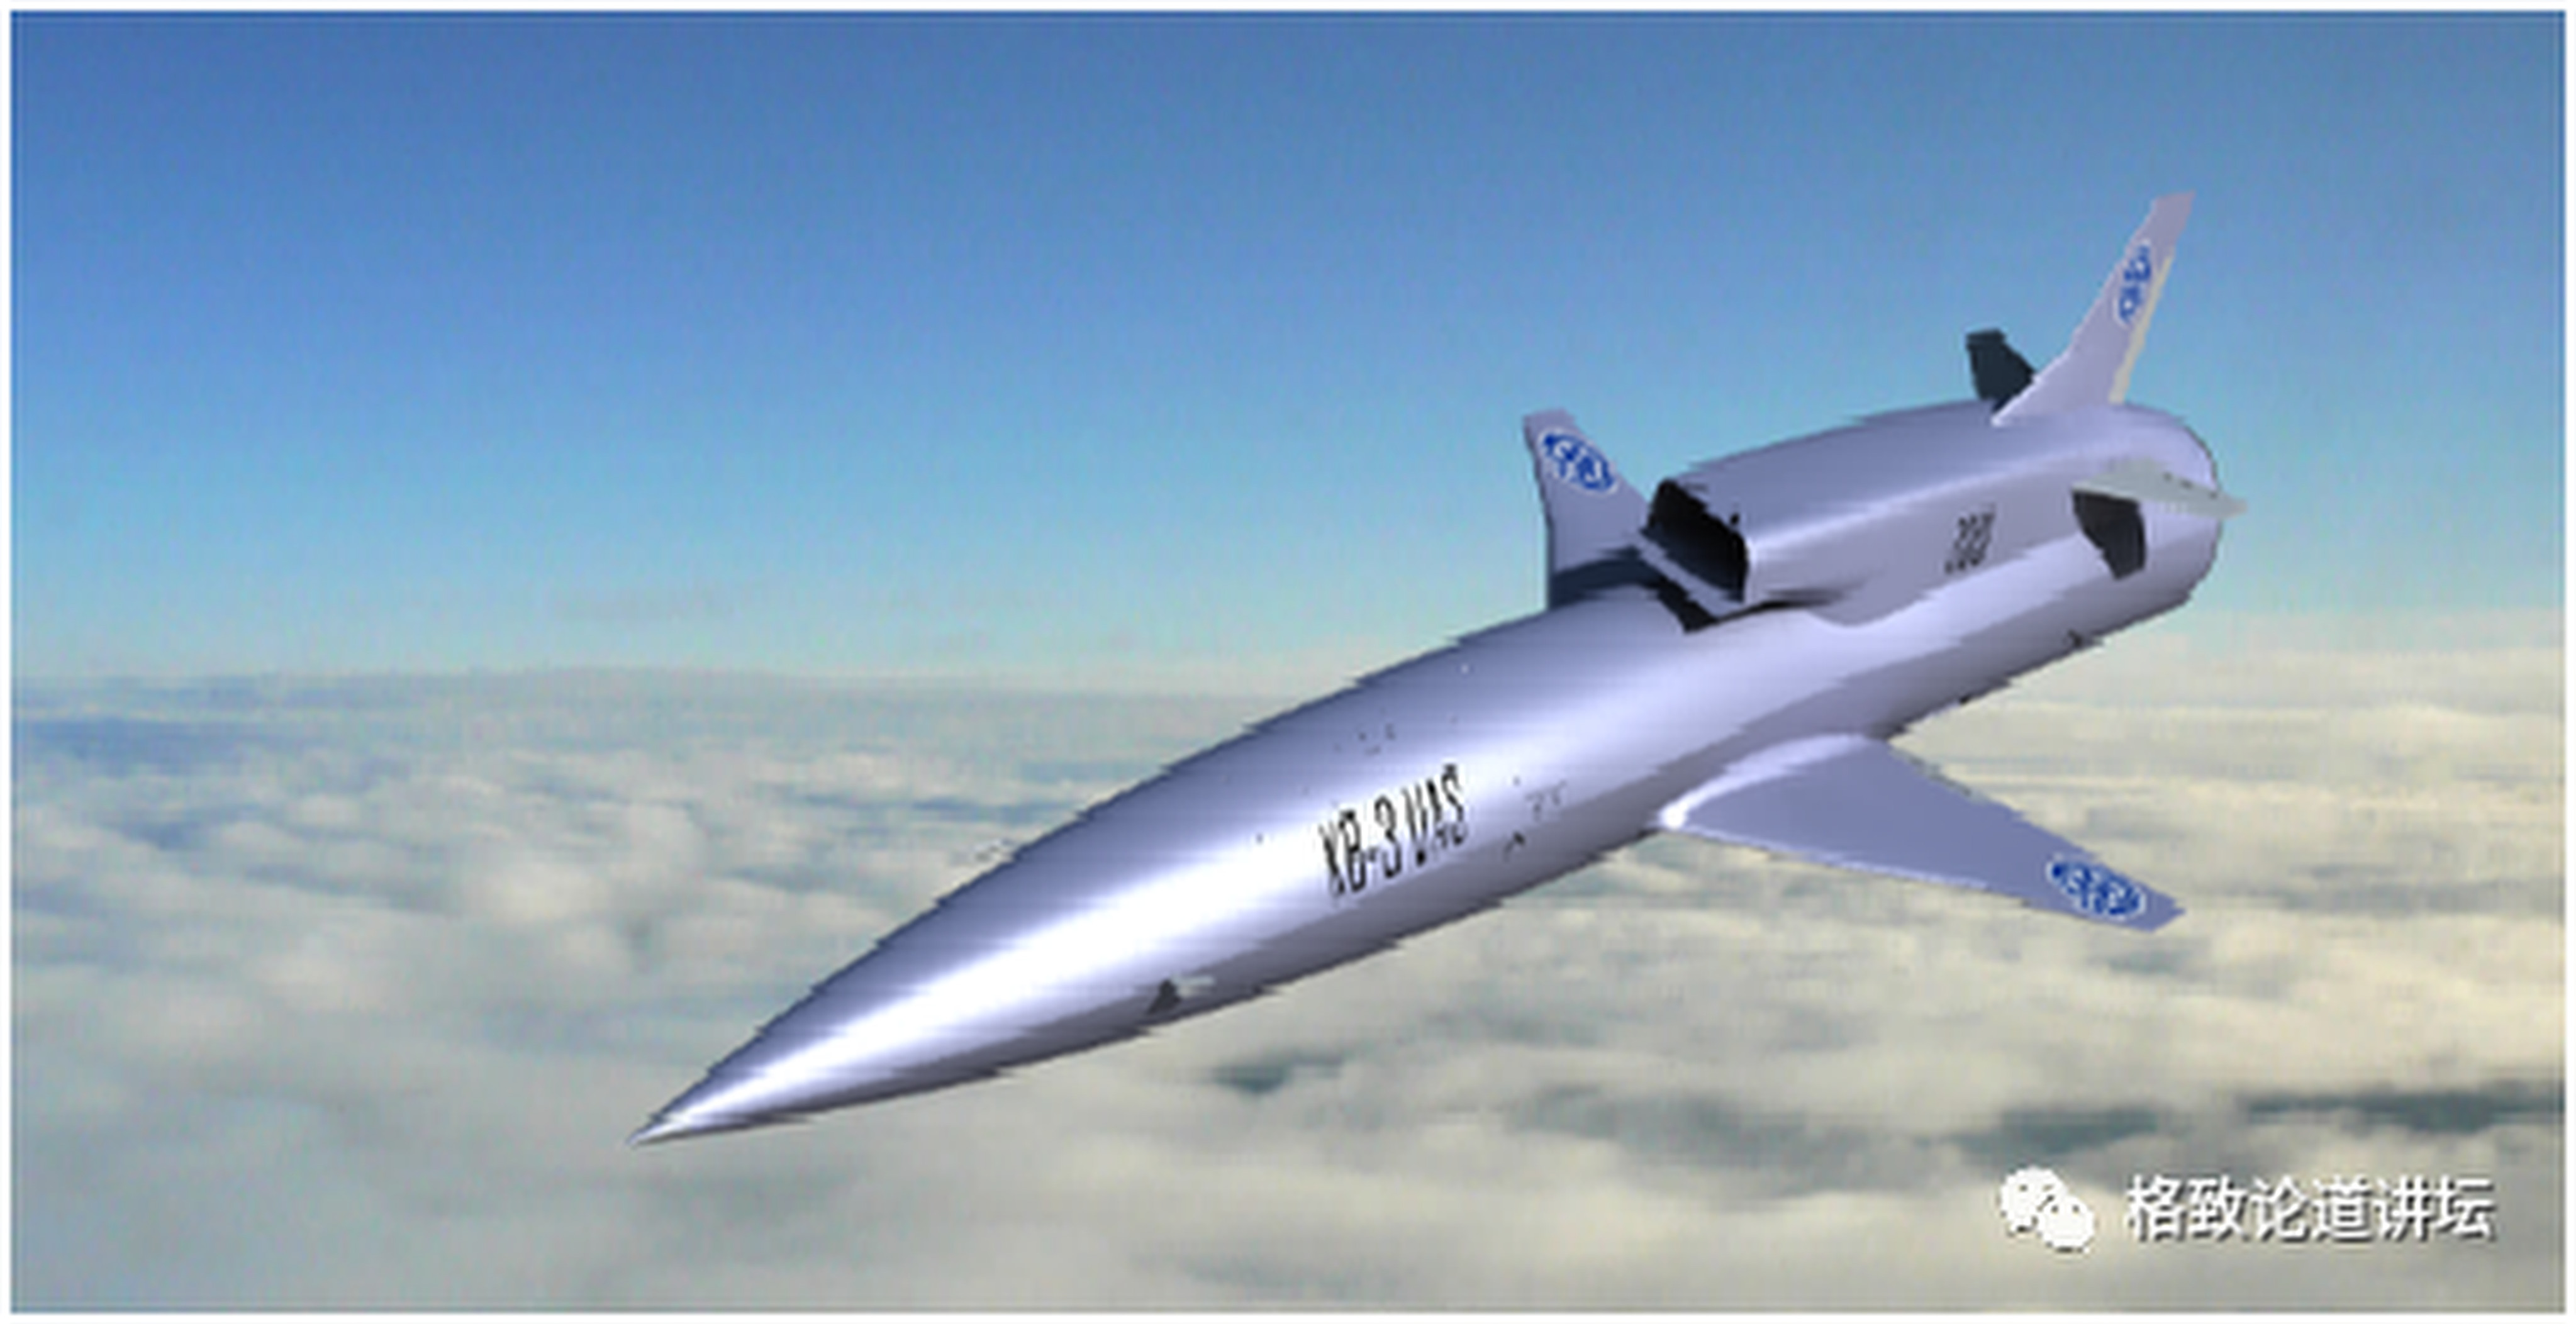 An artist’s impression of a Chinese supersonic drone powered by low-cost turbofan engine. Photo: Zhu Junqiang, Institute of Engineering Thermophysics, Chinese Academy of Sciences